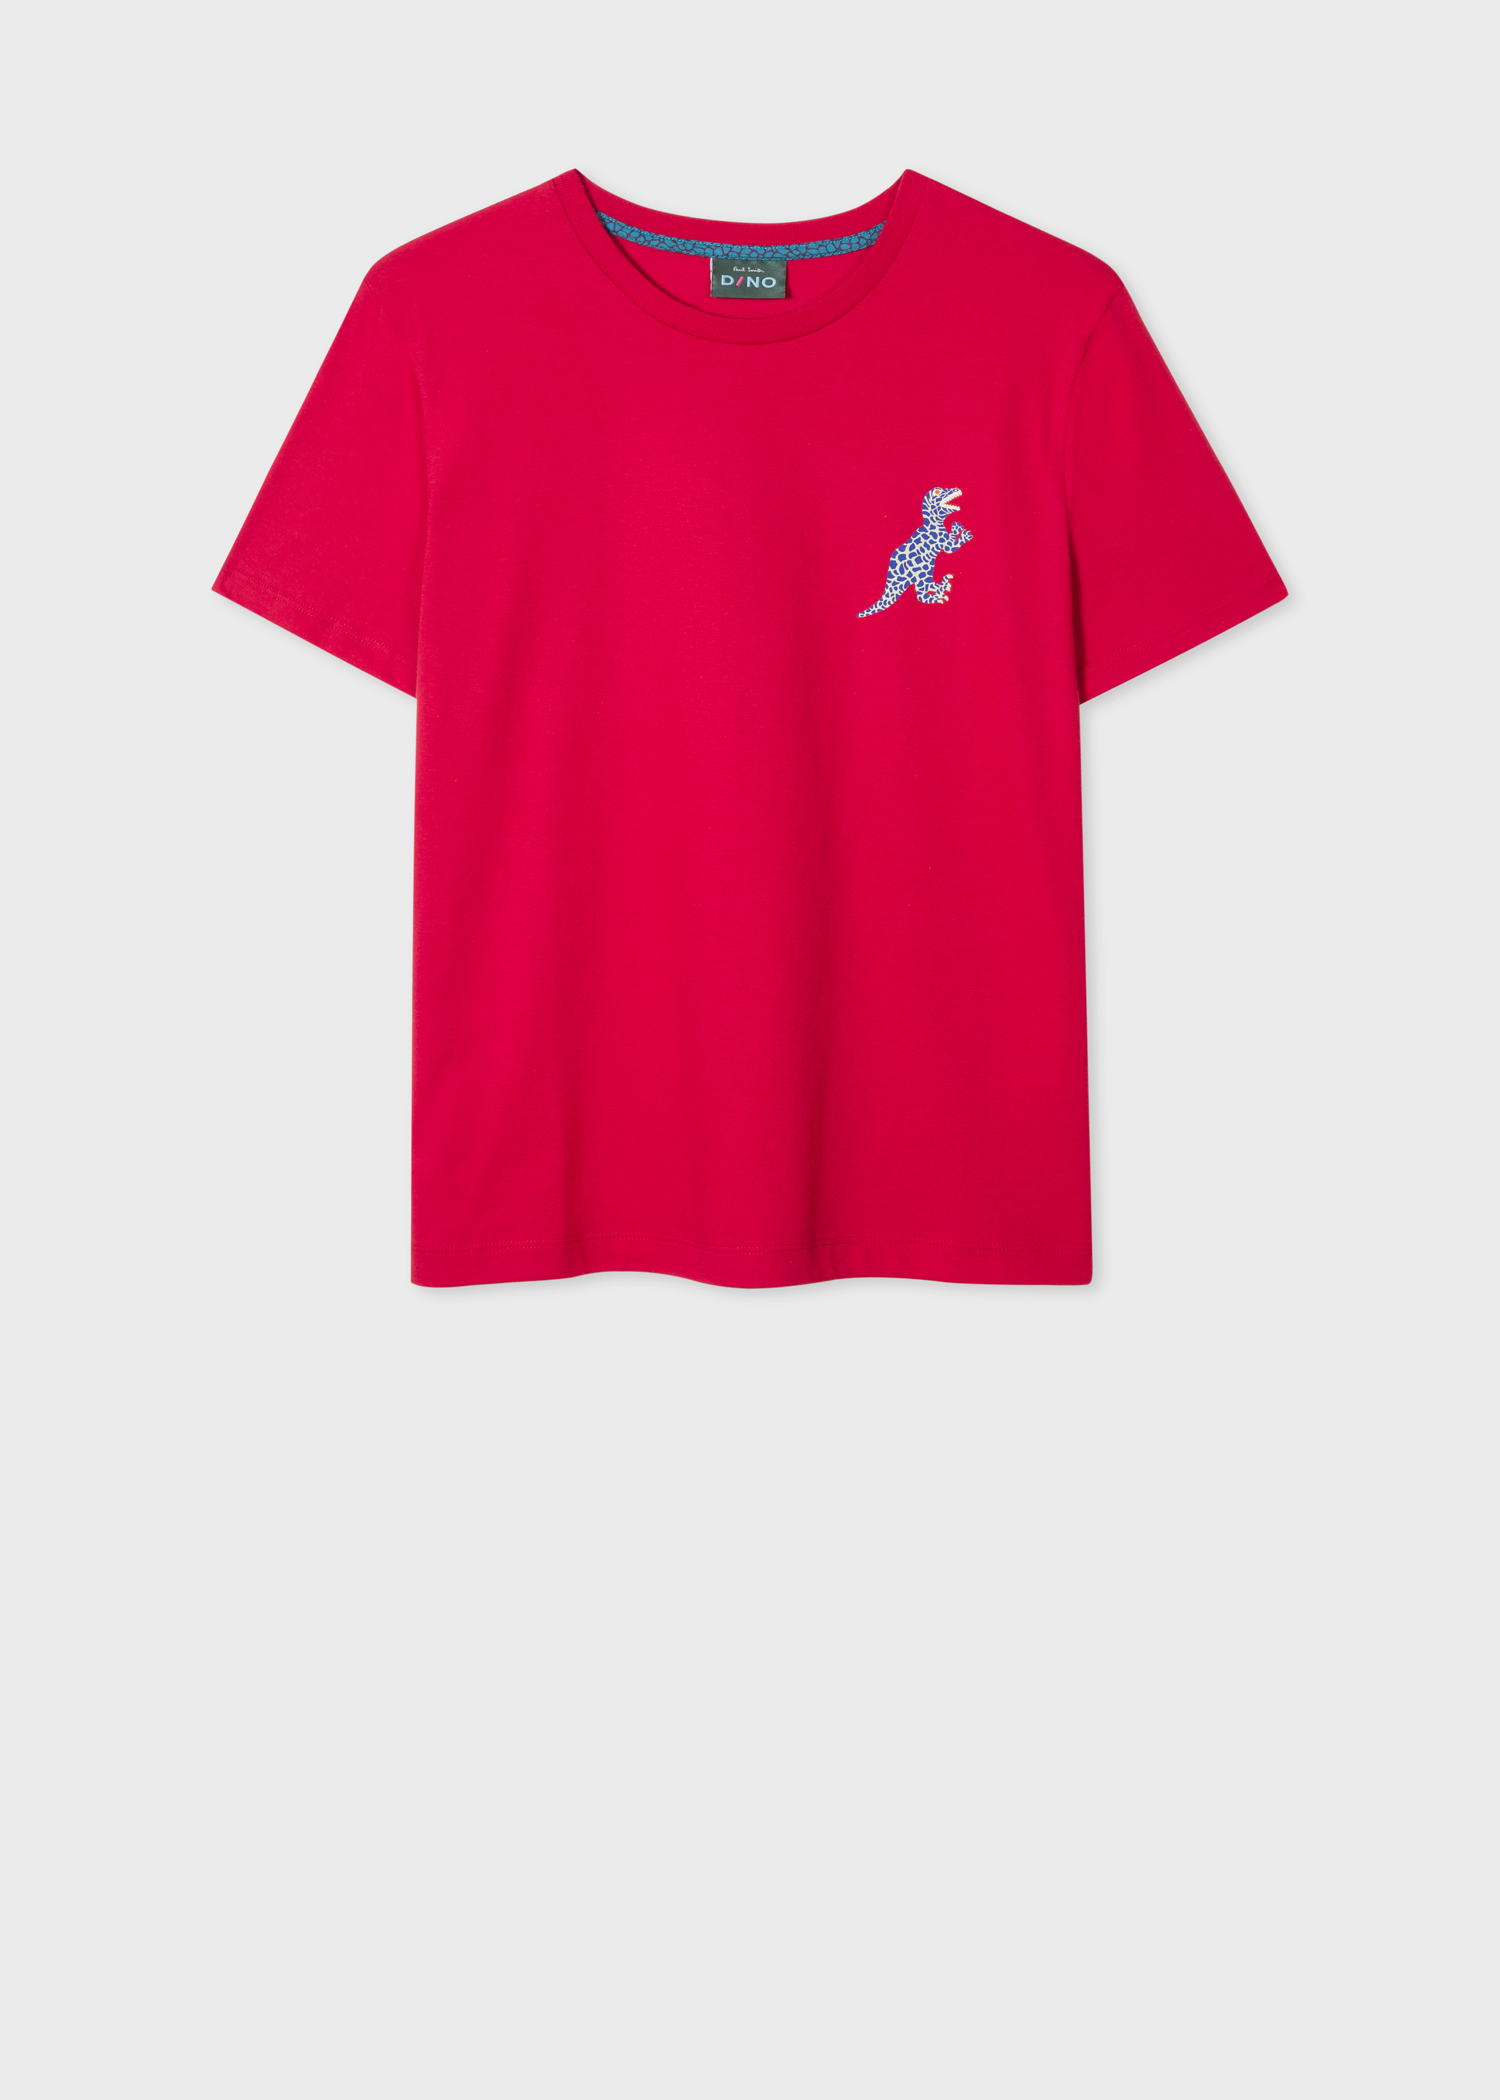 Front View - Women's Red Small 'Dino' T-Shirt Paul Smith